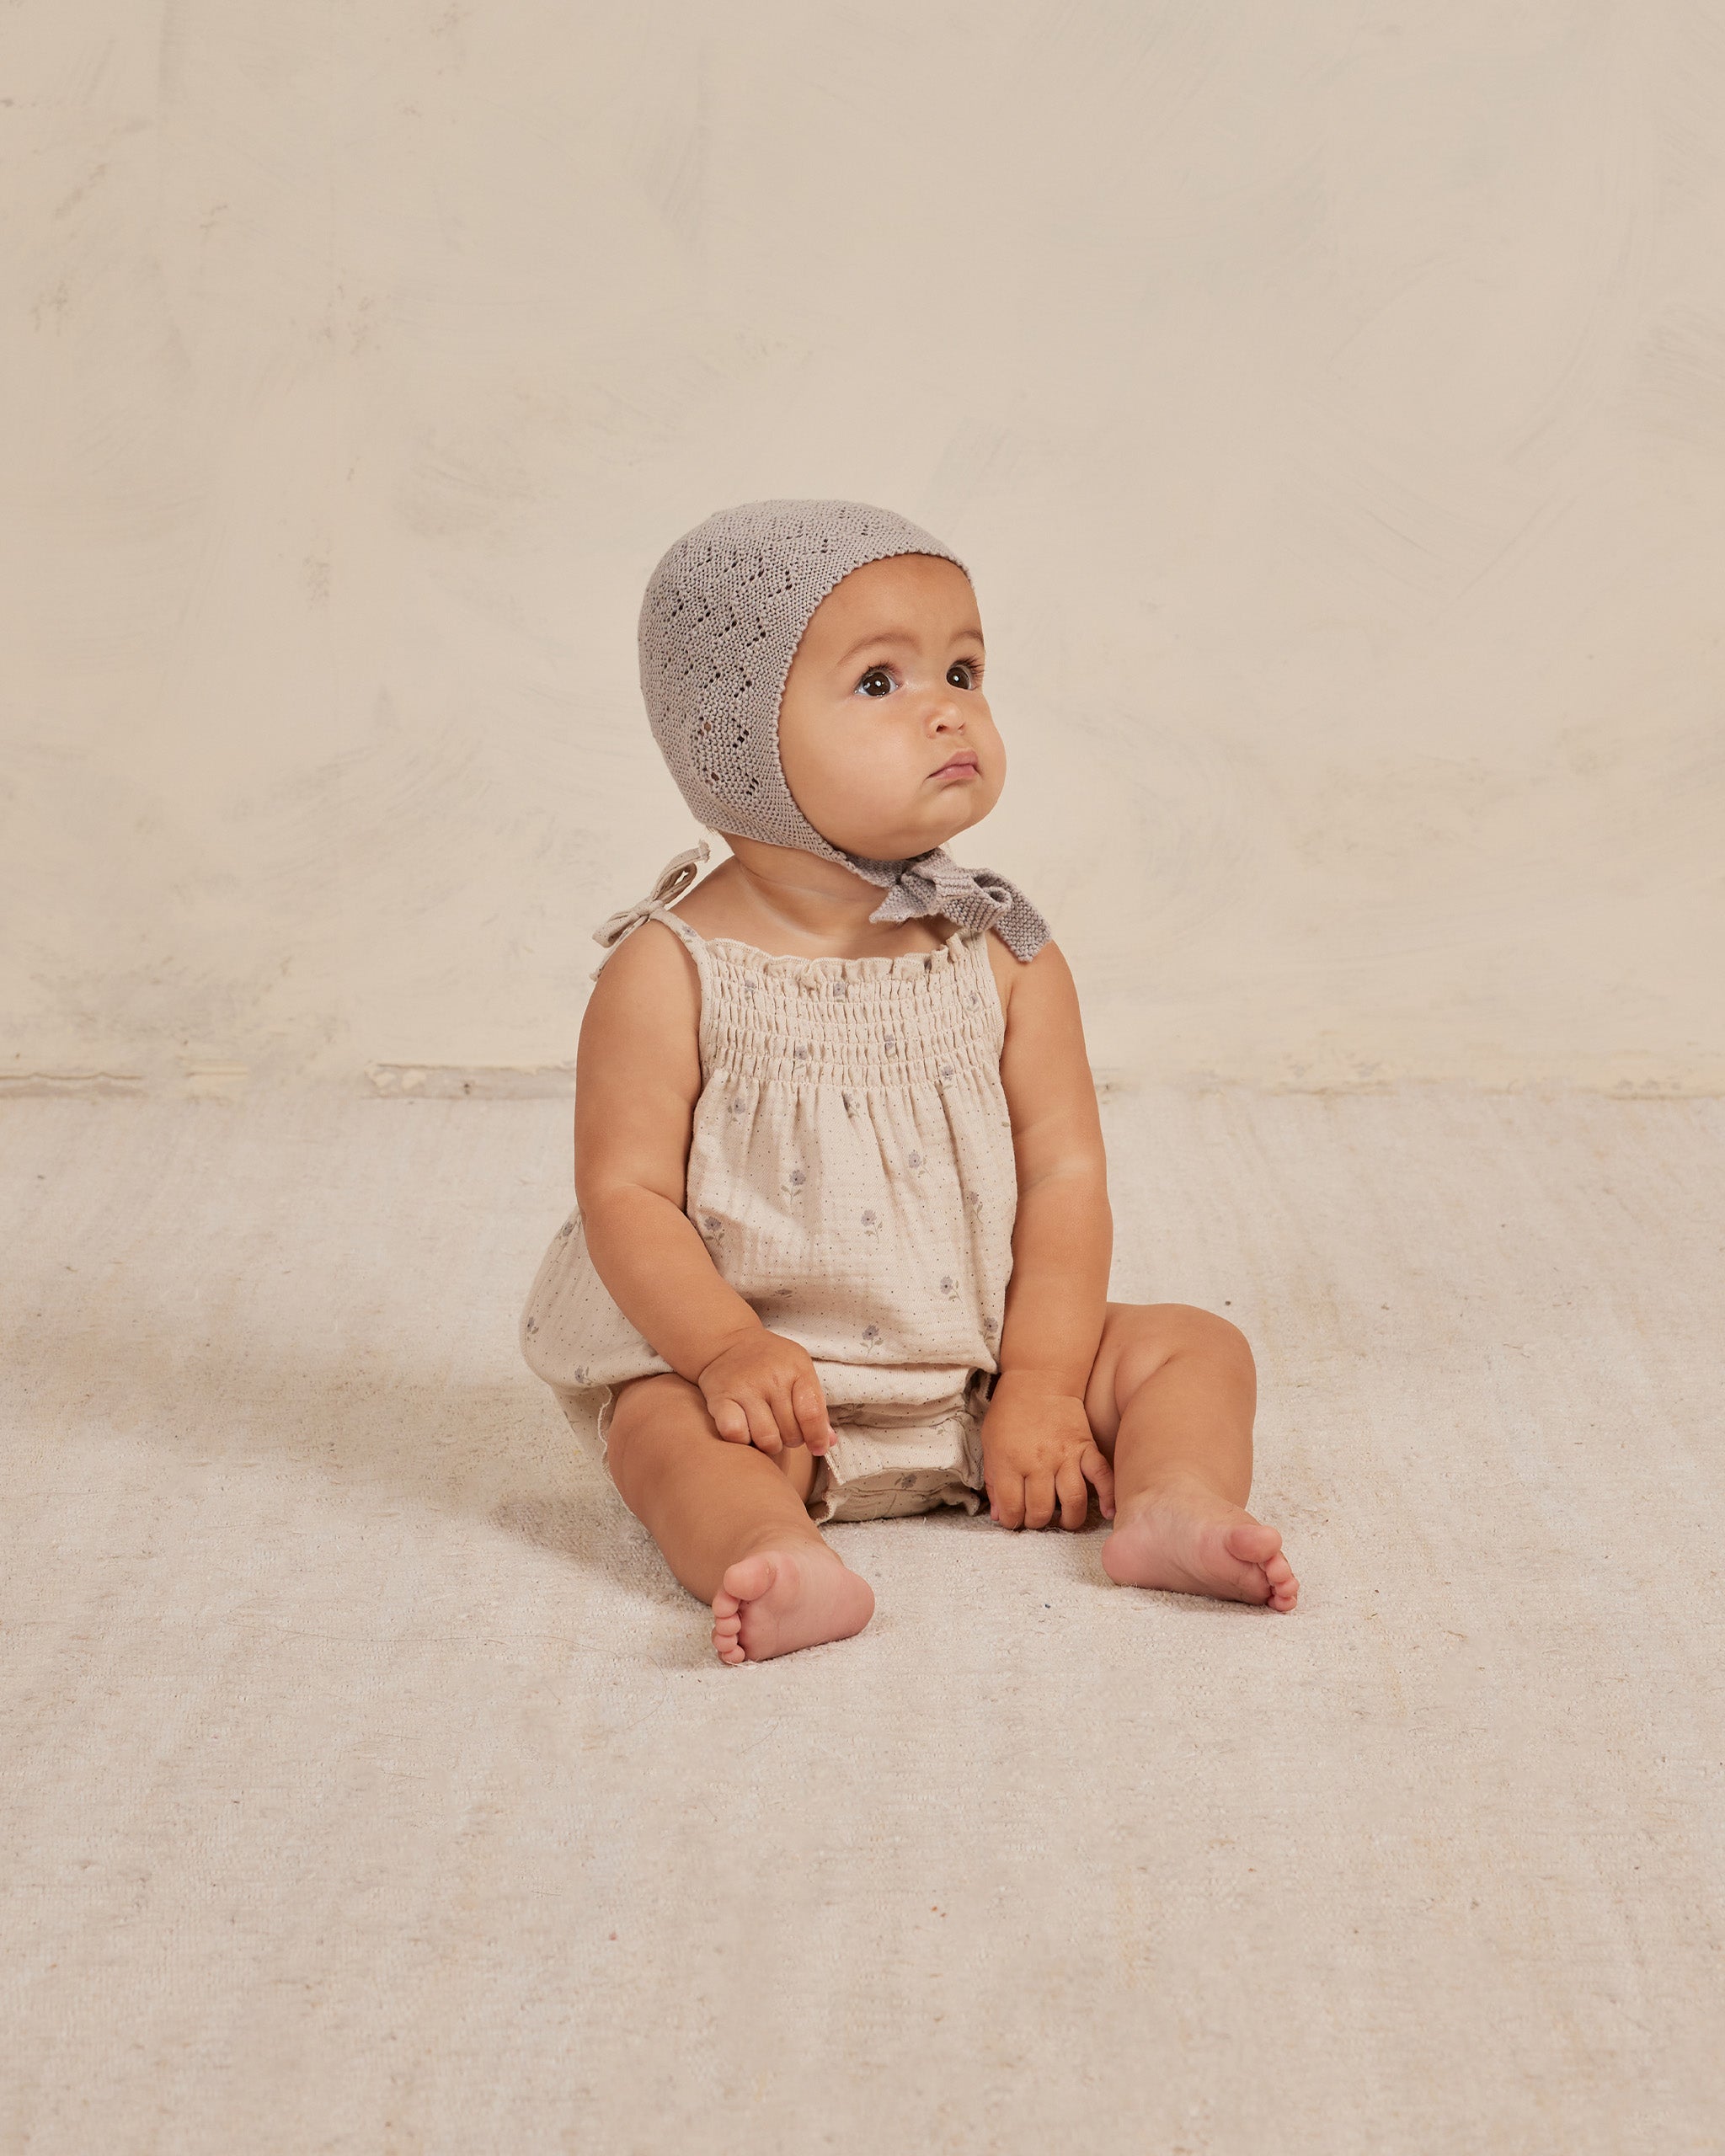 Pointelle Knit Bonnet || Lavender - Rylee + Cru | Kids Clothes | Trendy Baby Clothes | Modern Infant Outfits |